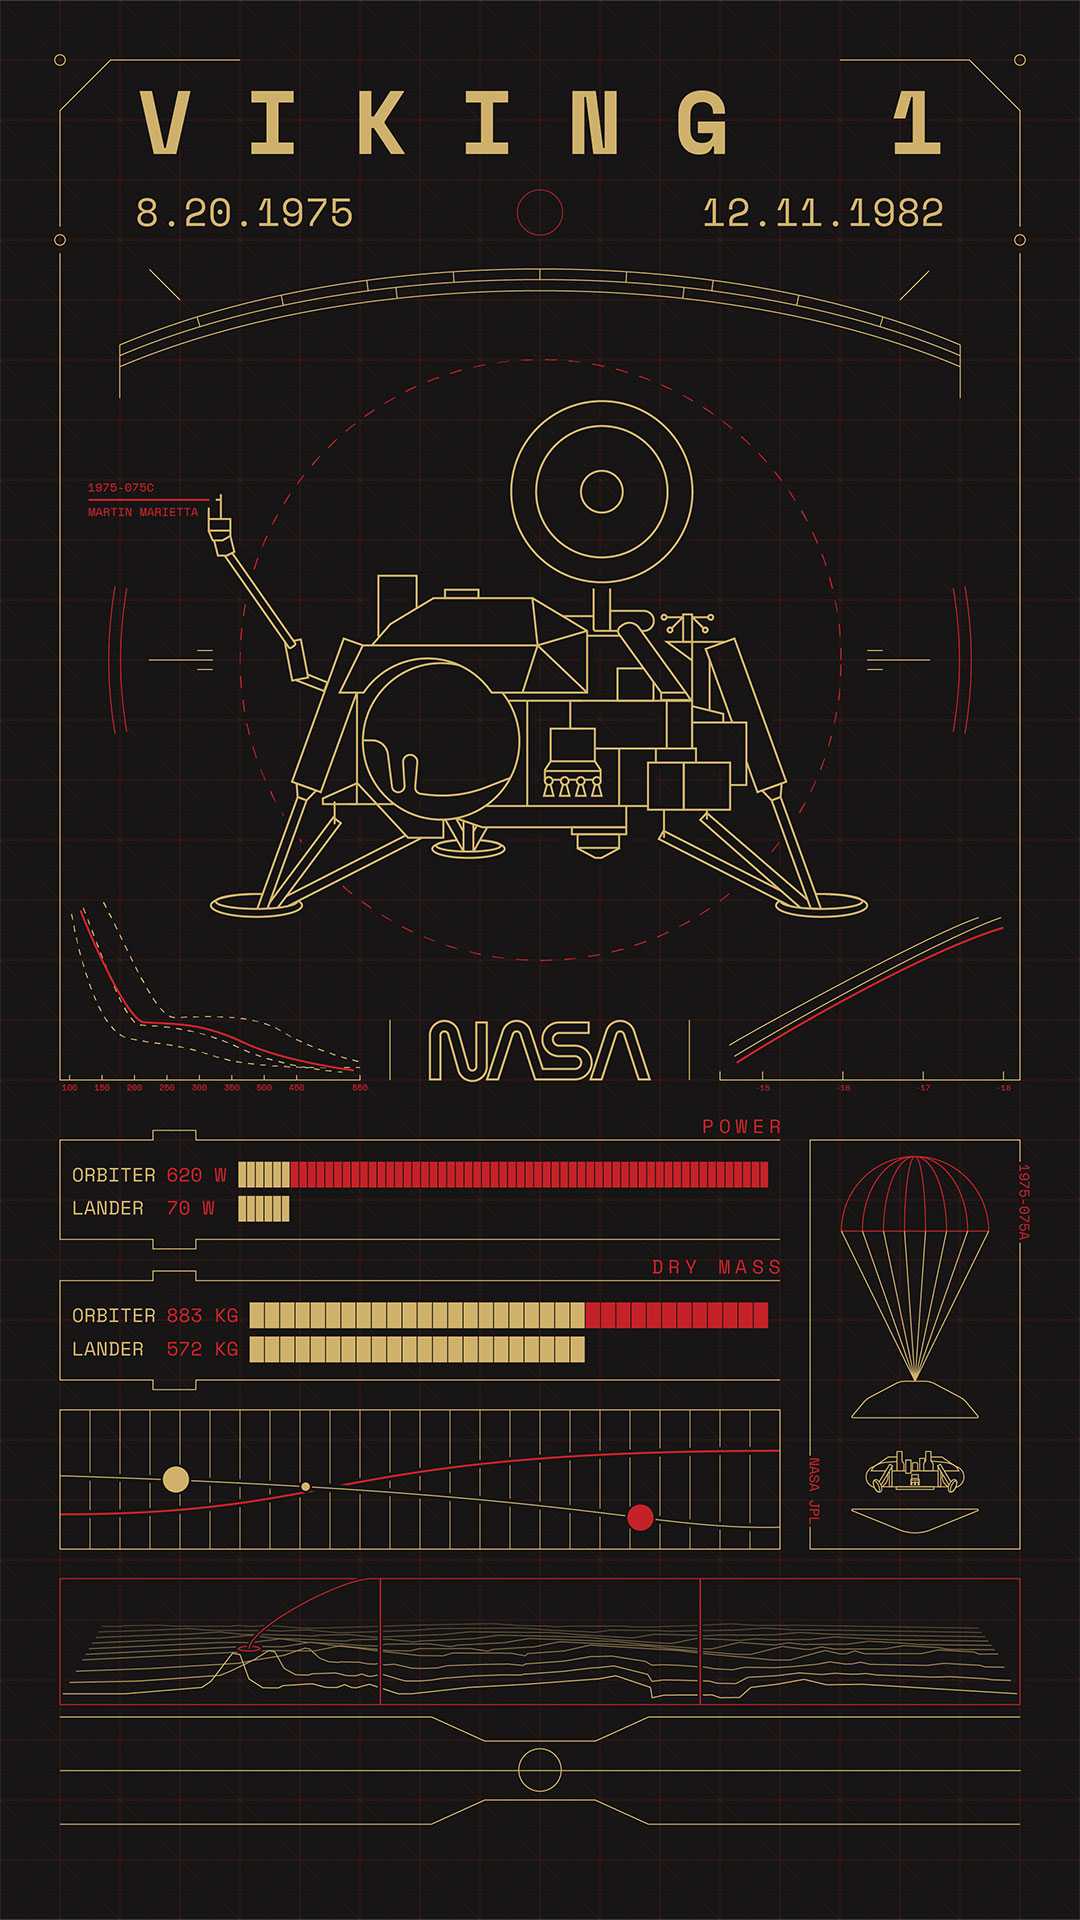 Static Poster with Viking 1 Lander in the center